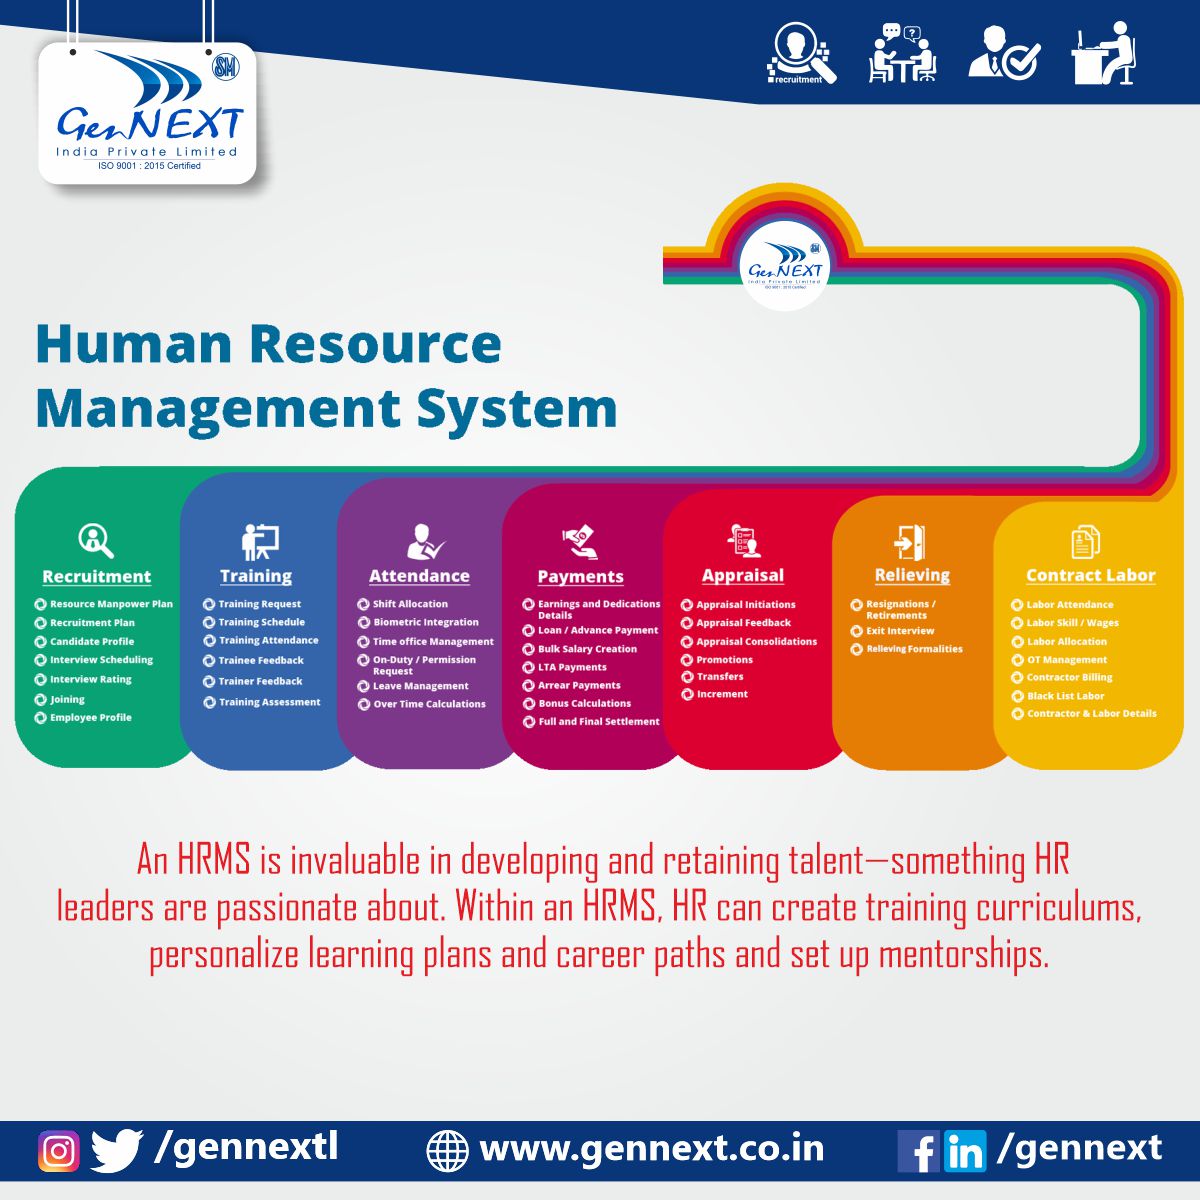 HRM has a strong focus on company culture and job satisfaction. Much of what motivates employees comes from the culture in which they work. 

#hrm #humanresource #employee #employeeengagement #gennext #gennextjob #gennextindia